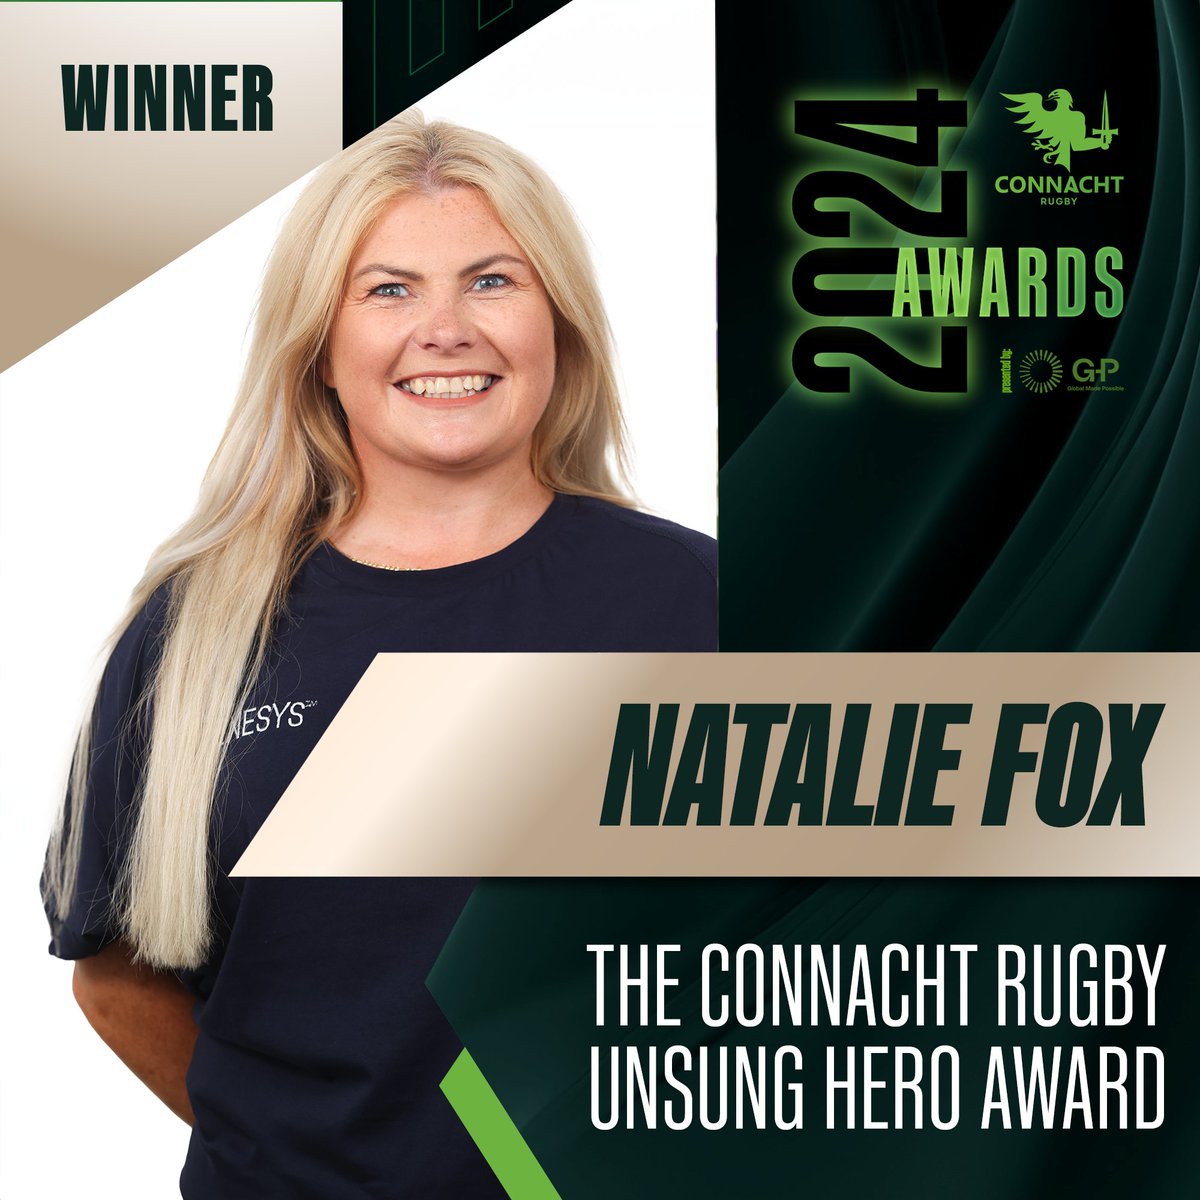 A special award for a special person. Natalie Fox is 2023/24 Connacht Rugby Unsung Hero! #ConnachtRugbyAwards 💫 @GlobalEOR